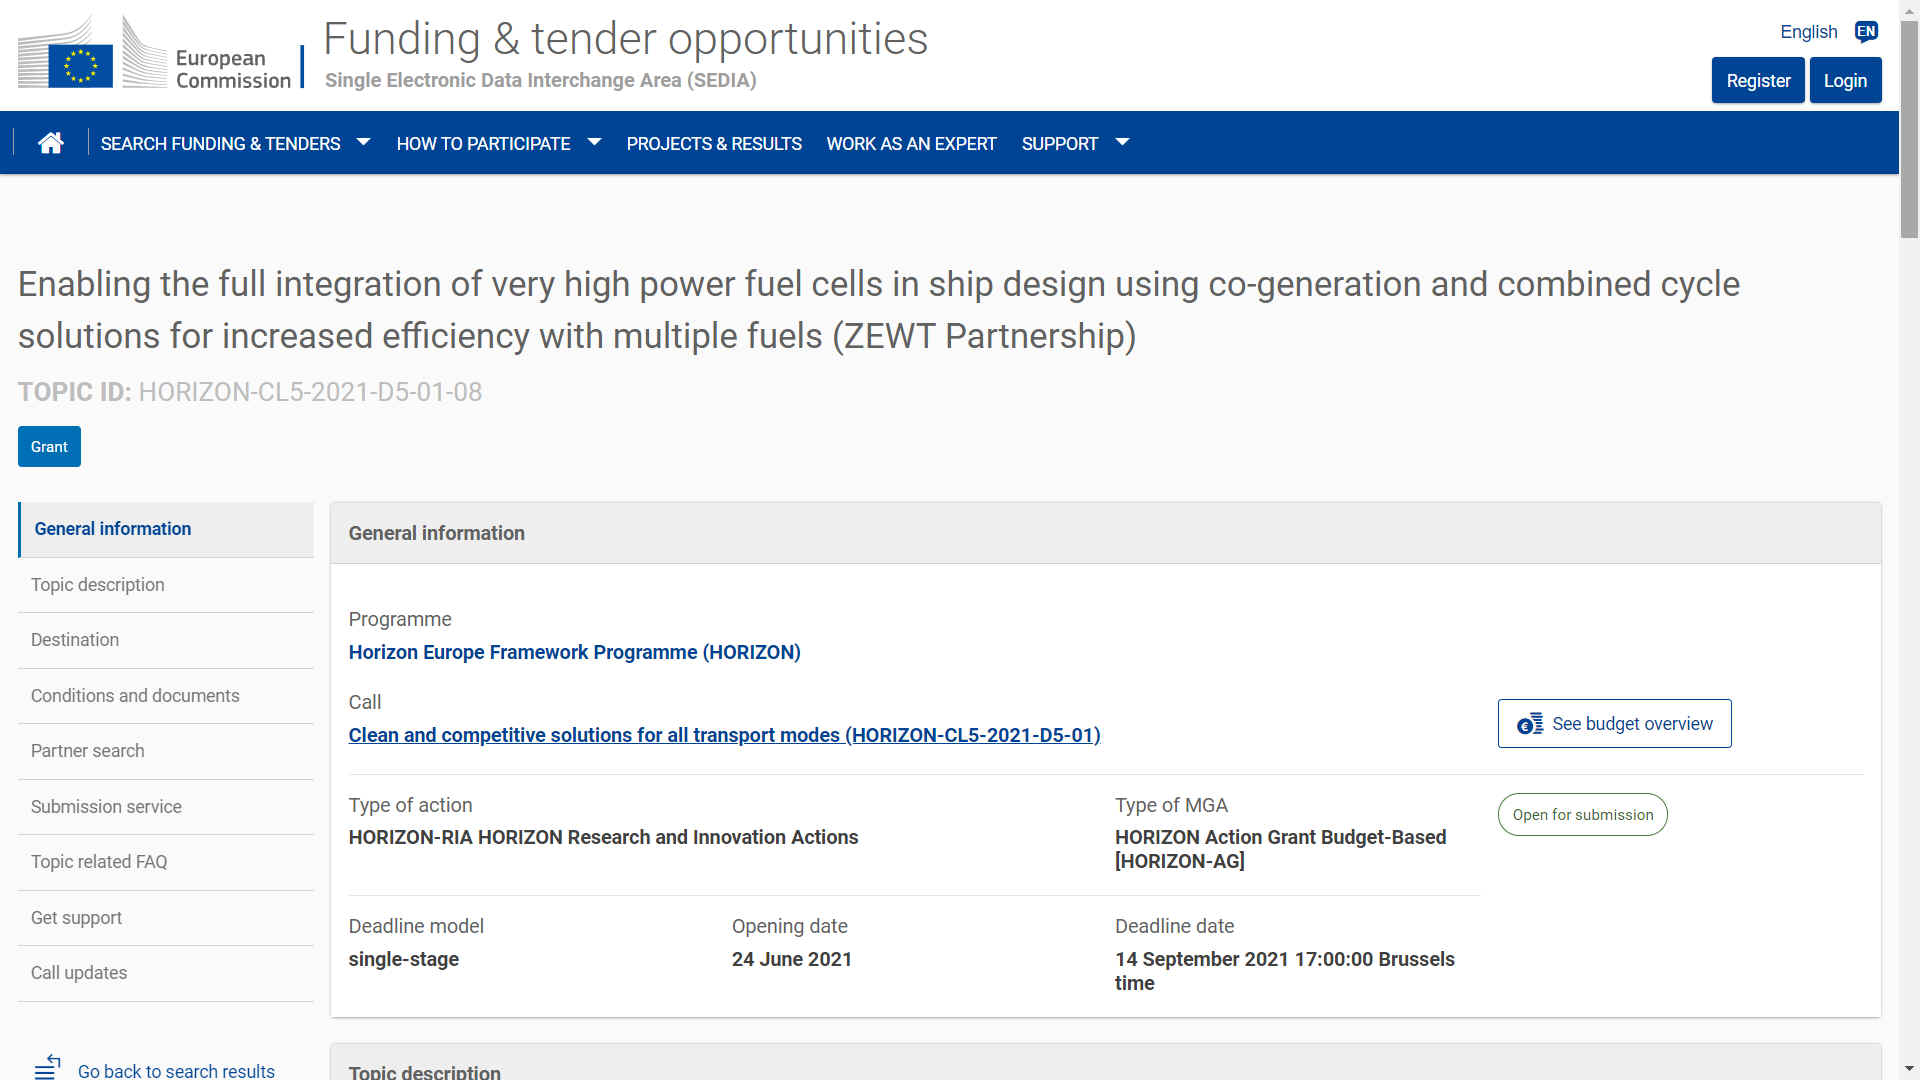 eNABLING THE FULL INTEGRATION OF VERY HIGH POWER FUEL CELLS IN SHIP DESIGN USING CO-GENERATION & COMBINED CYCLE SOLUTIONS FOR INCREASE EFFICIENY WITH MULTIPLE FUELS ZEWT PARTNERSHIP